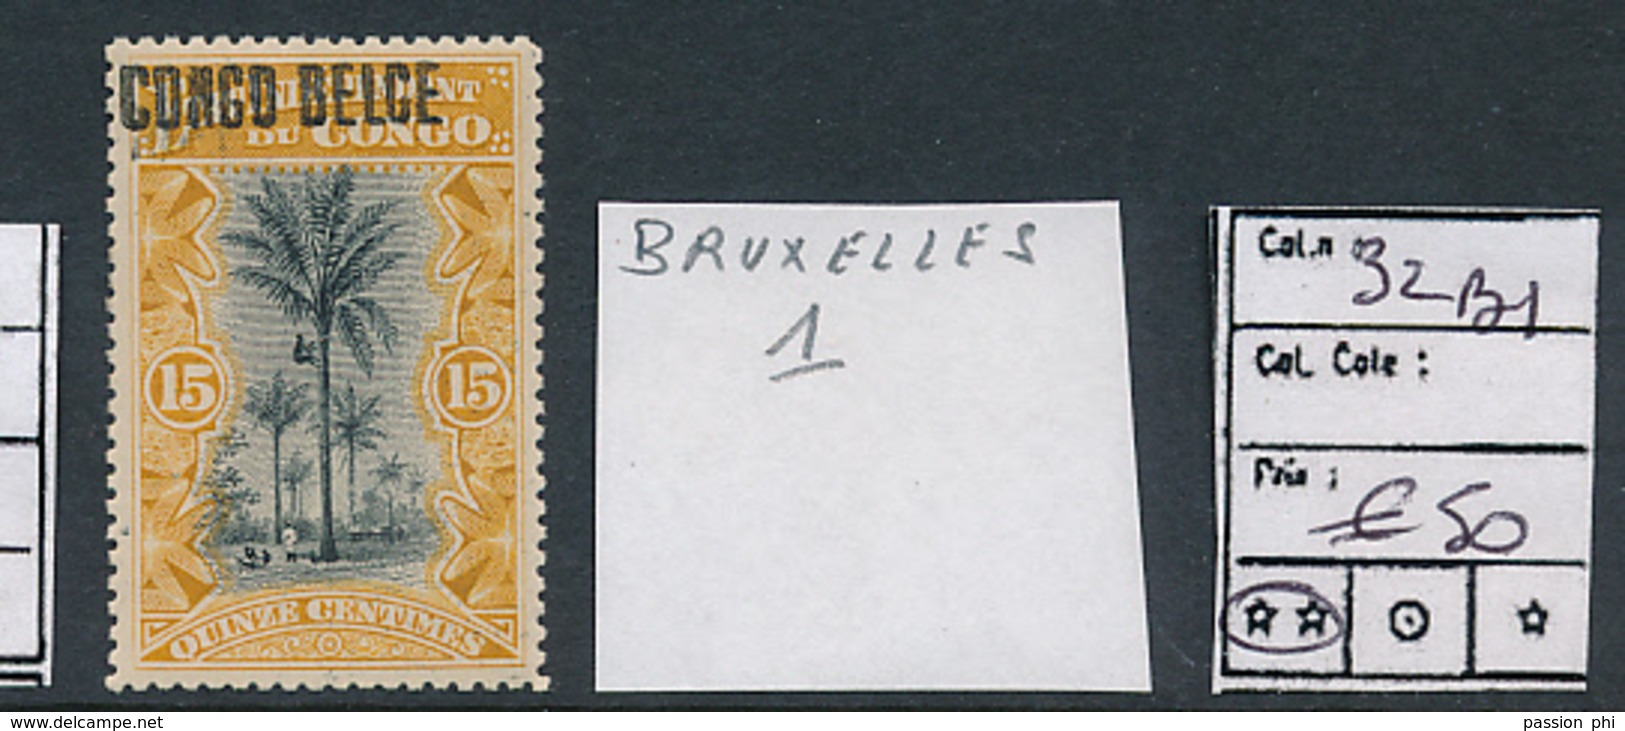 BELGIAN CONGO 1909 ISSUE "BRUSSELS" COB 32B1 MNH - Unused Stamps